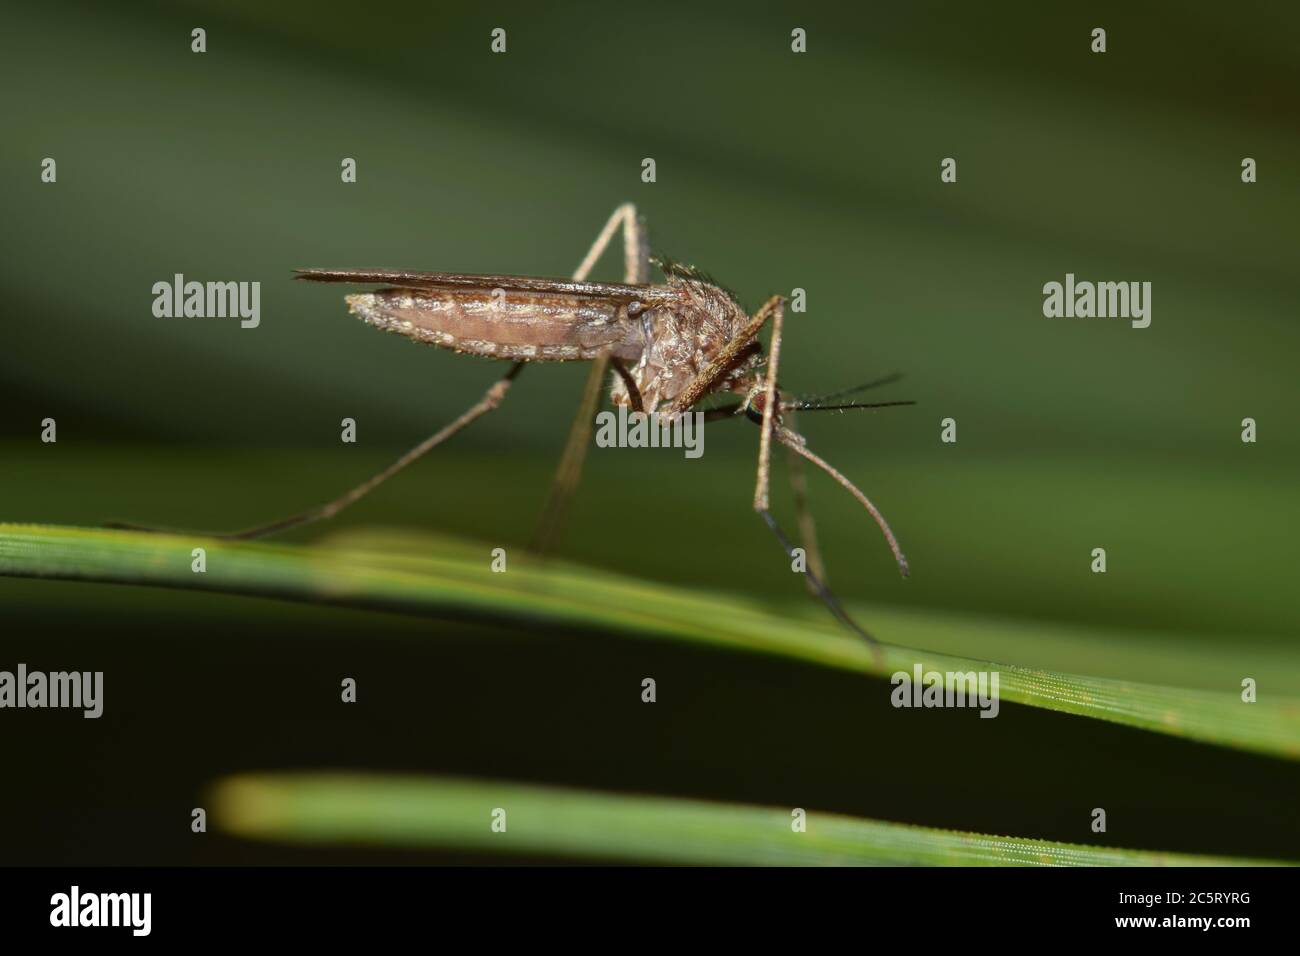 Mosquito on a green leaf during the night hours in Houston, TX. They are most prolific during the warmer months and can carry the West Nile virus. Stock Photo